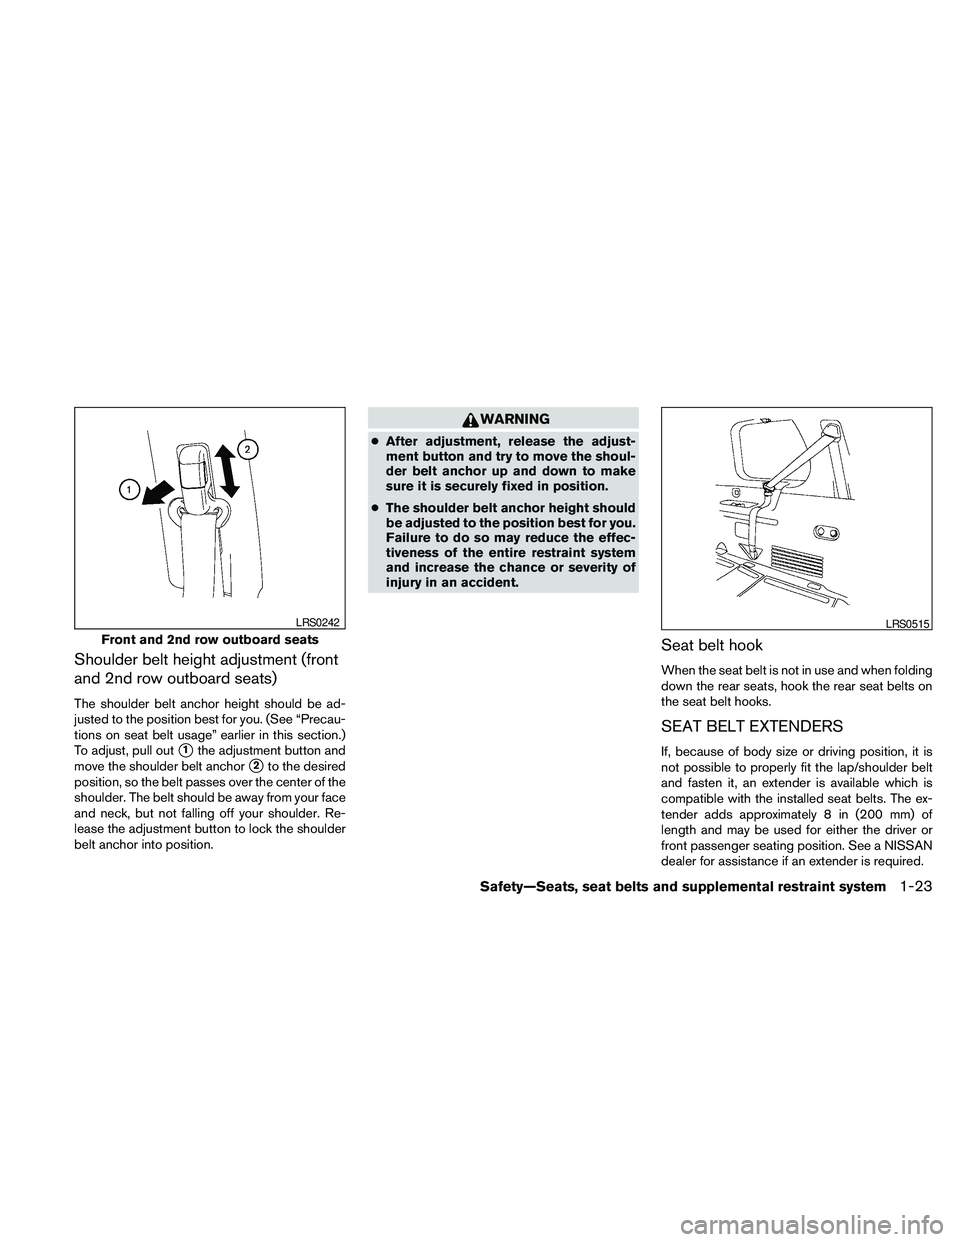 NISSAN PATHFINDER 2010  Owner´s Manual Shoulder belt height adjustment (front
and 2nd row outboard seats)
The shoulder belt anchor height should be ad-
justed to the position best for you. (See “Precau-
tions on seat belt usage” earlie